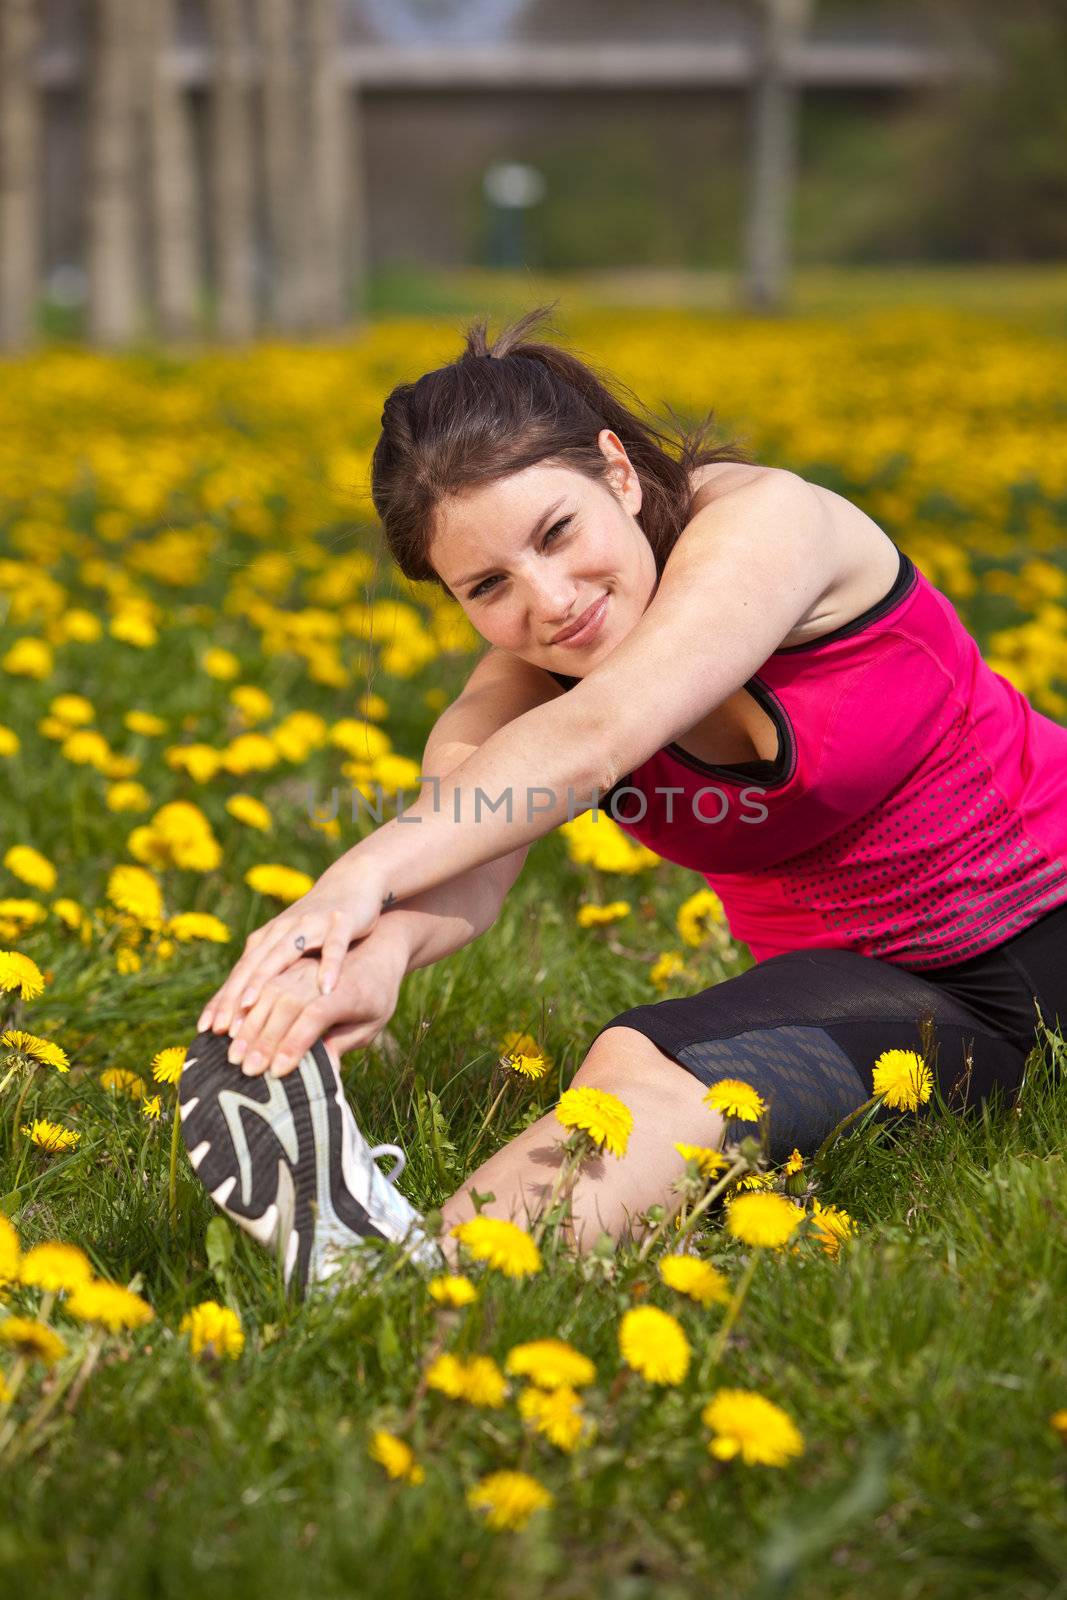 Woman doing stretch exercises by Fotosmurf